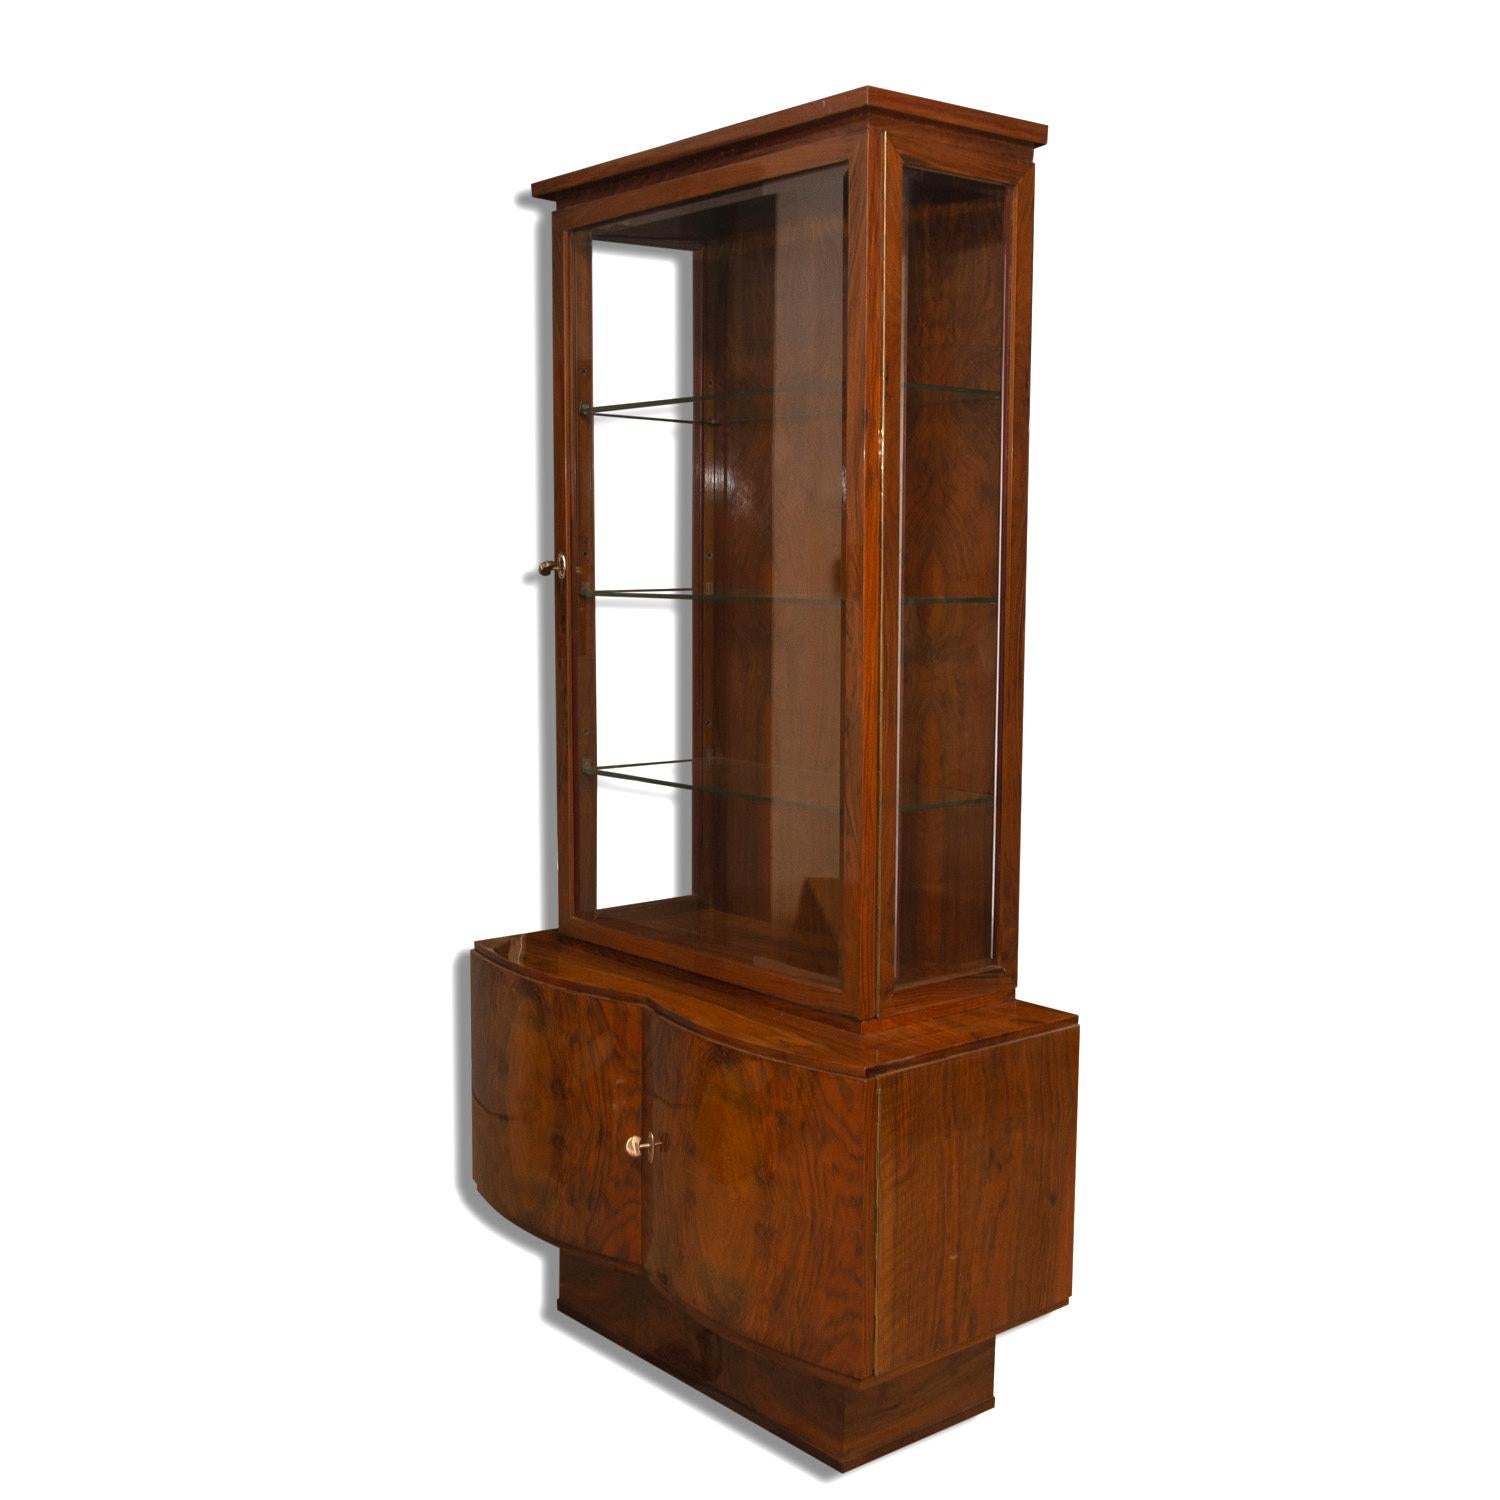 This Art Deco narrow showcase is veneered in walnut. It was designed and manufactured in the 1930s in Bohemia. The cabinet was designed in the context of the Central European pre-war design school. The cabinet has inlaid glass, rounded but also